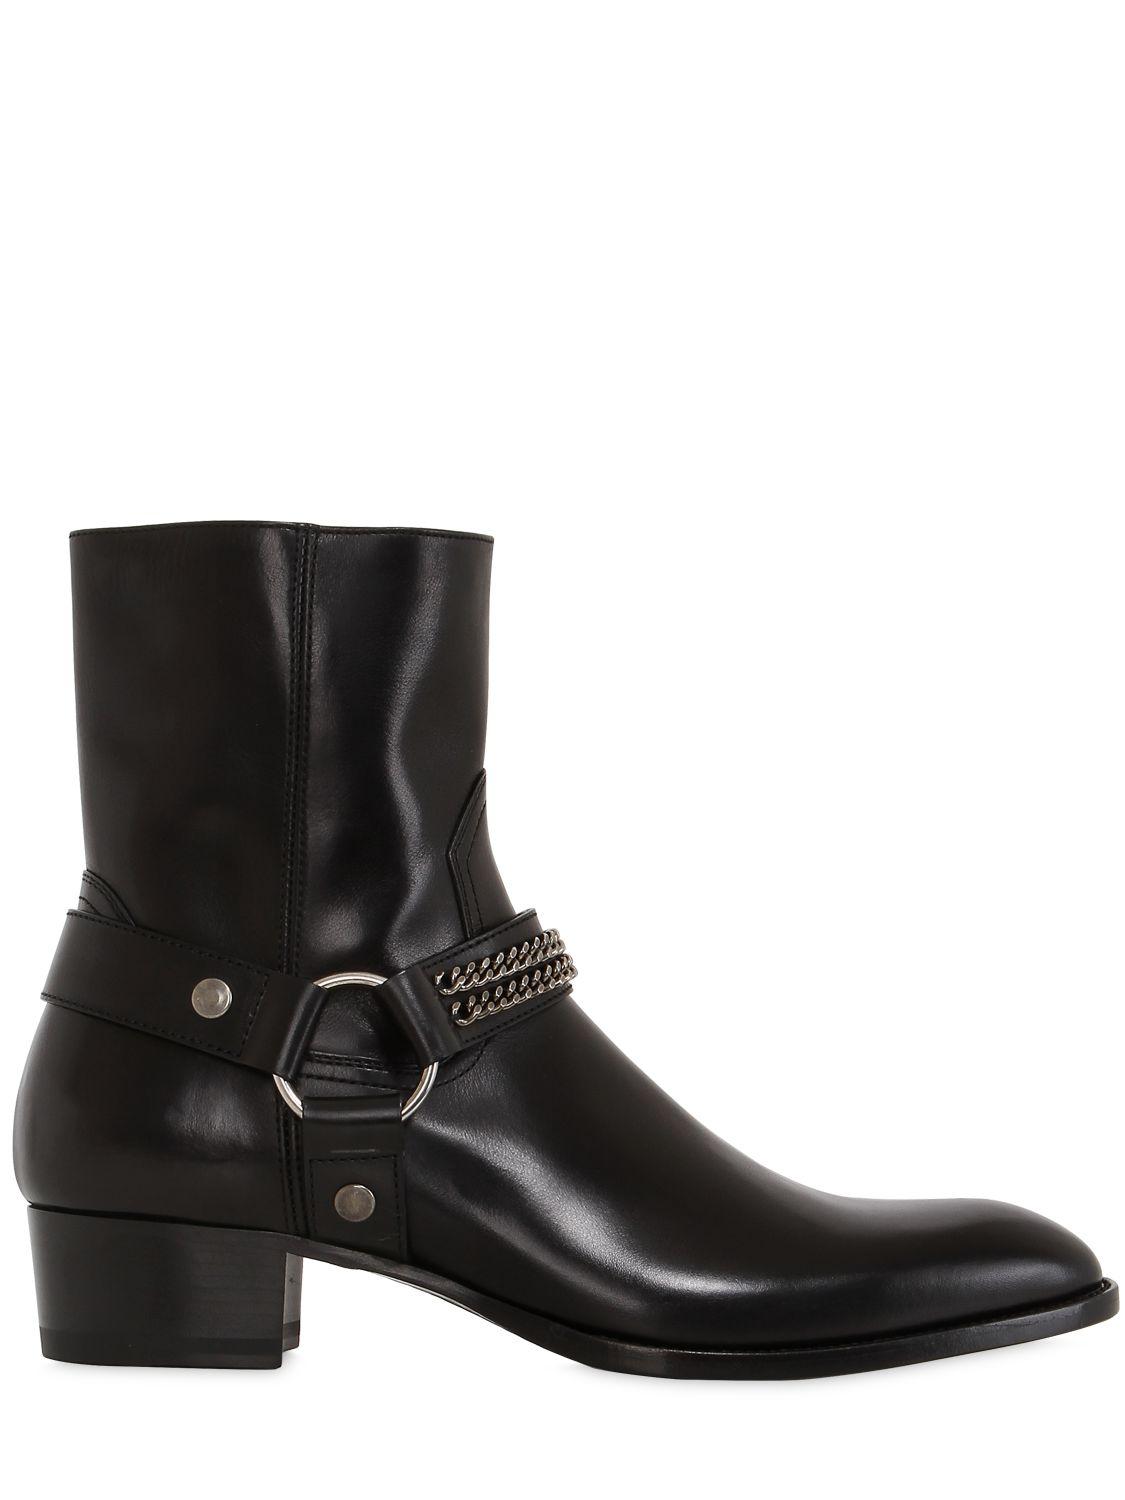 Saint laurent 40mm Wyatt Belted Leather Cropped Boots in Black for Men ...